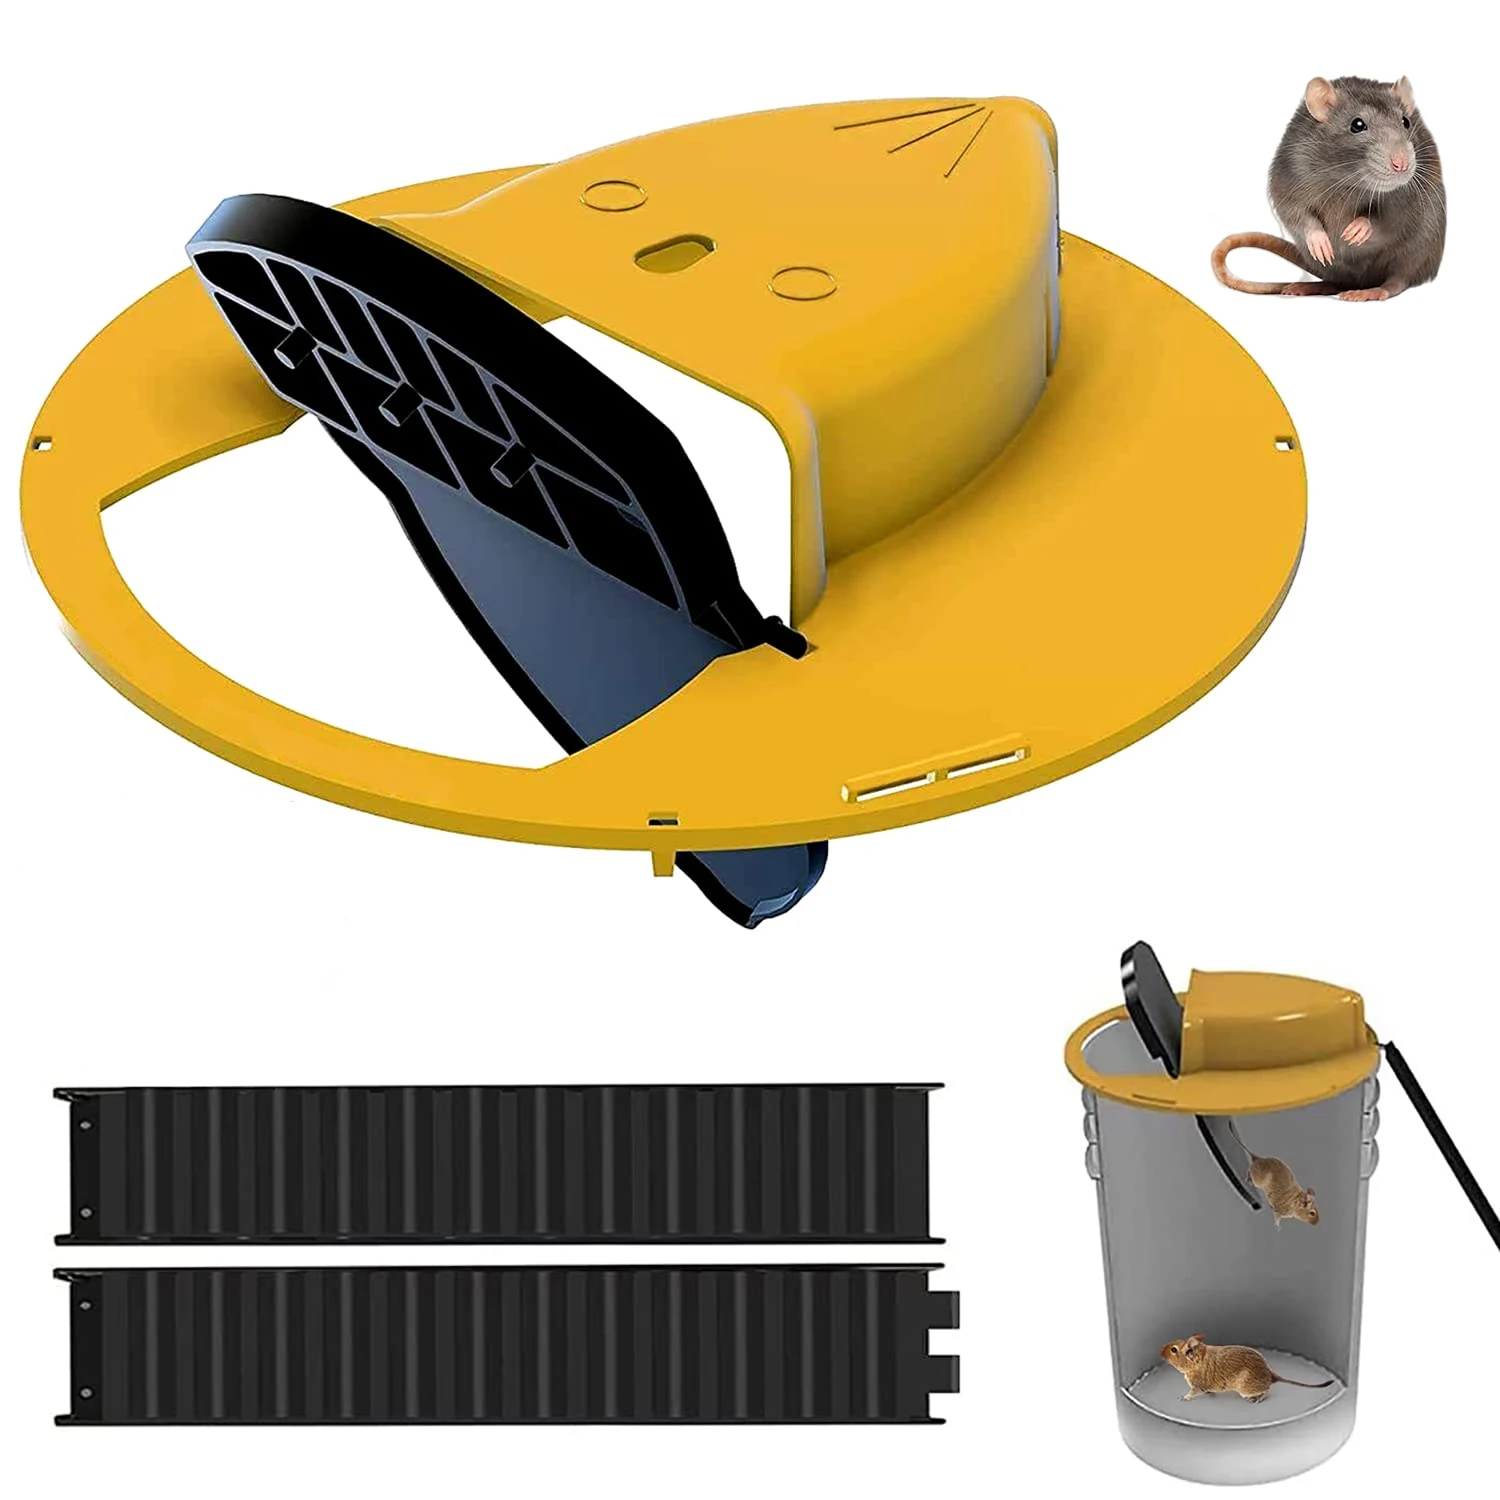 https://ae01.alicdn.com/kf/S97de75c42974484aba2de57df66e11eb9/Mouse-Rat-Trap-Bucket-Turnover-and-Slide-Bucket-Lid-Mouse-Rat-Trap-for-Indoor-Outdoor-Mouse.jpg